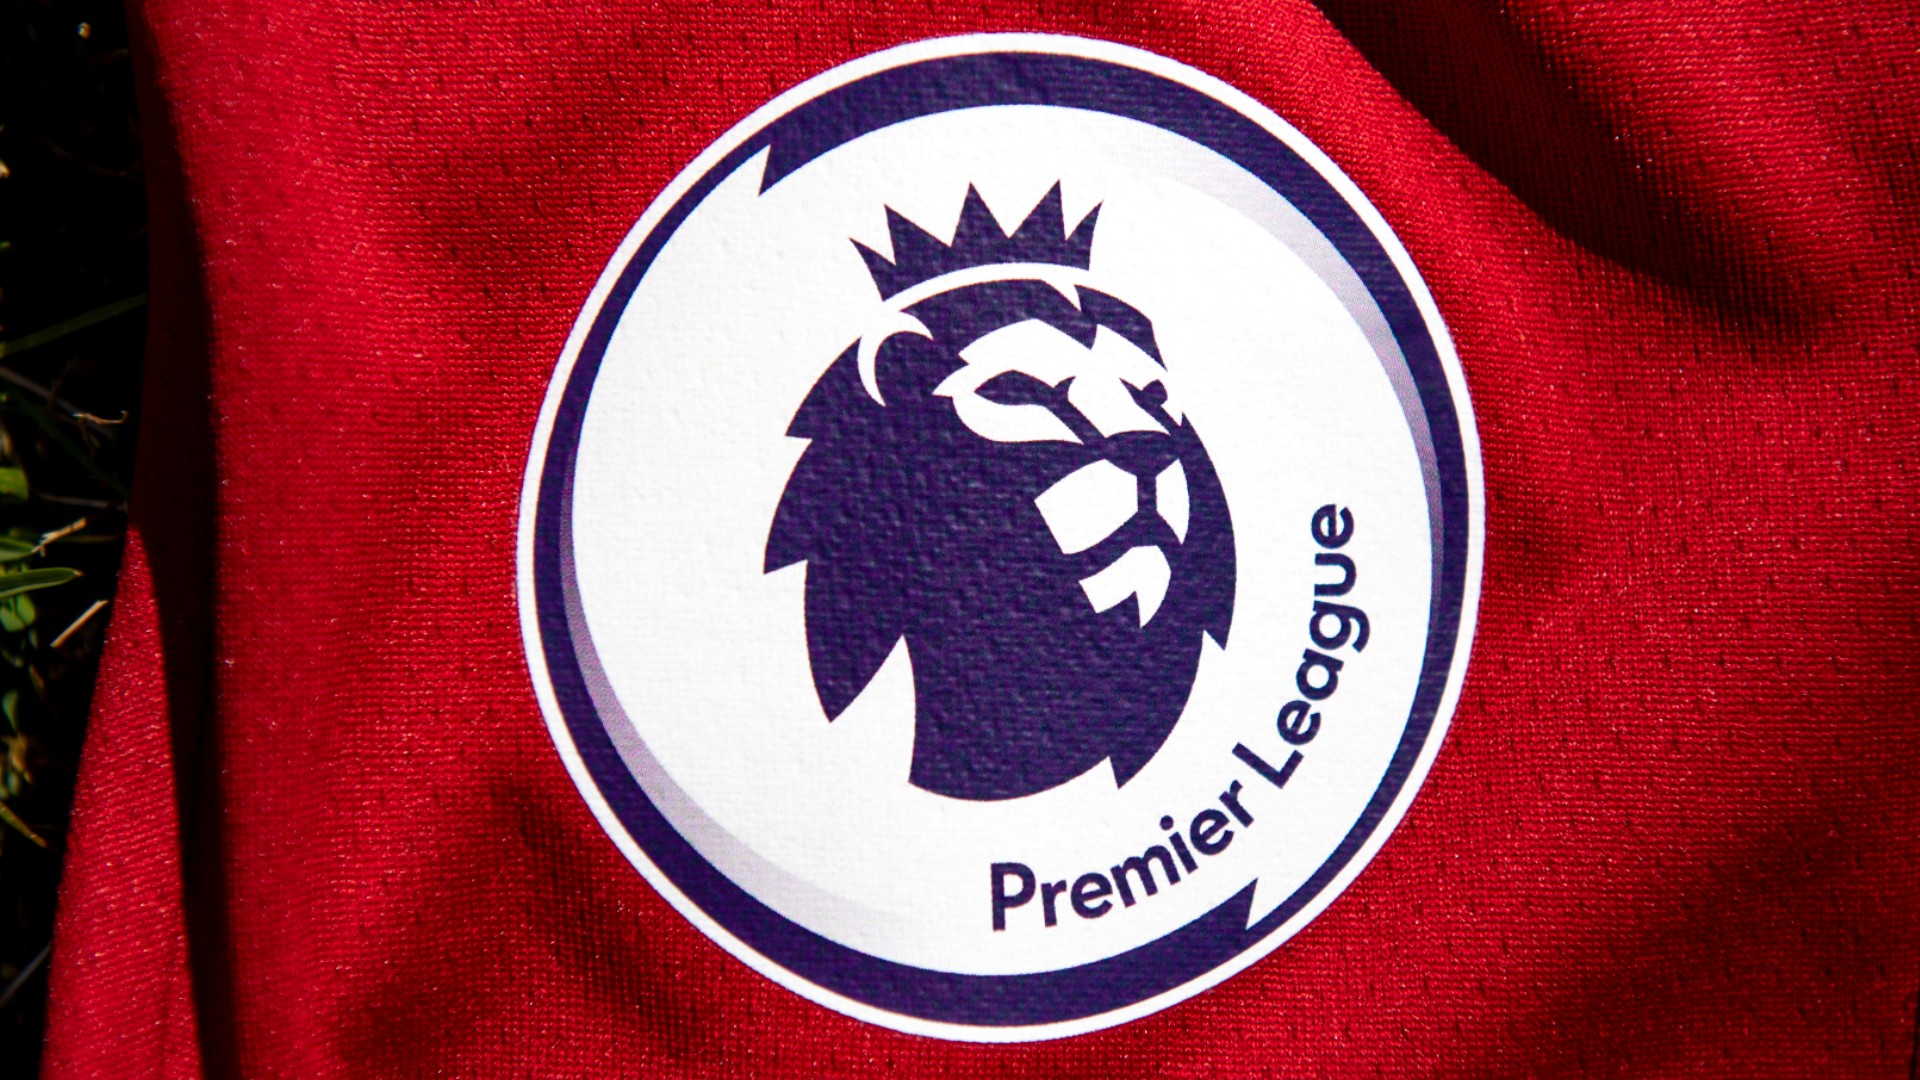 English Premier League odds, lines, overs & unders: Updated betting info and picks